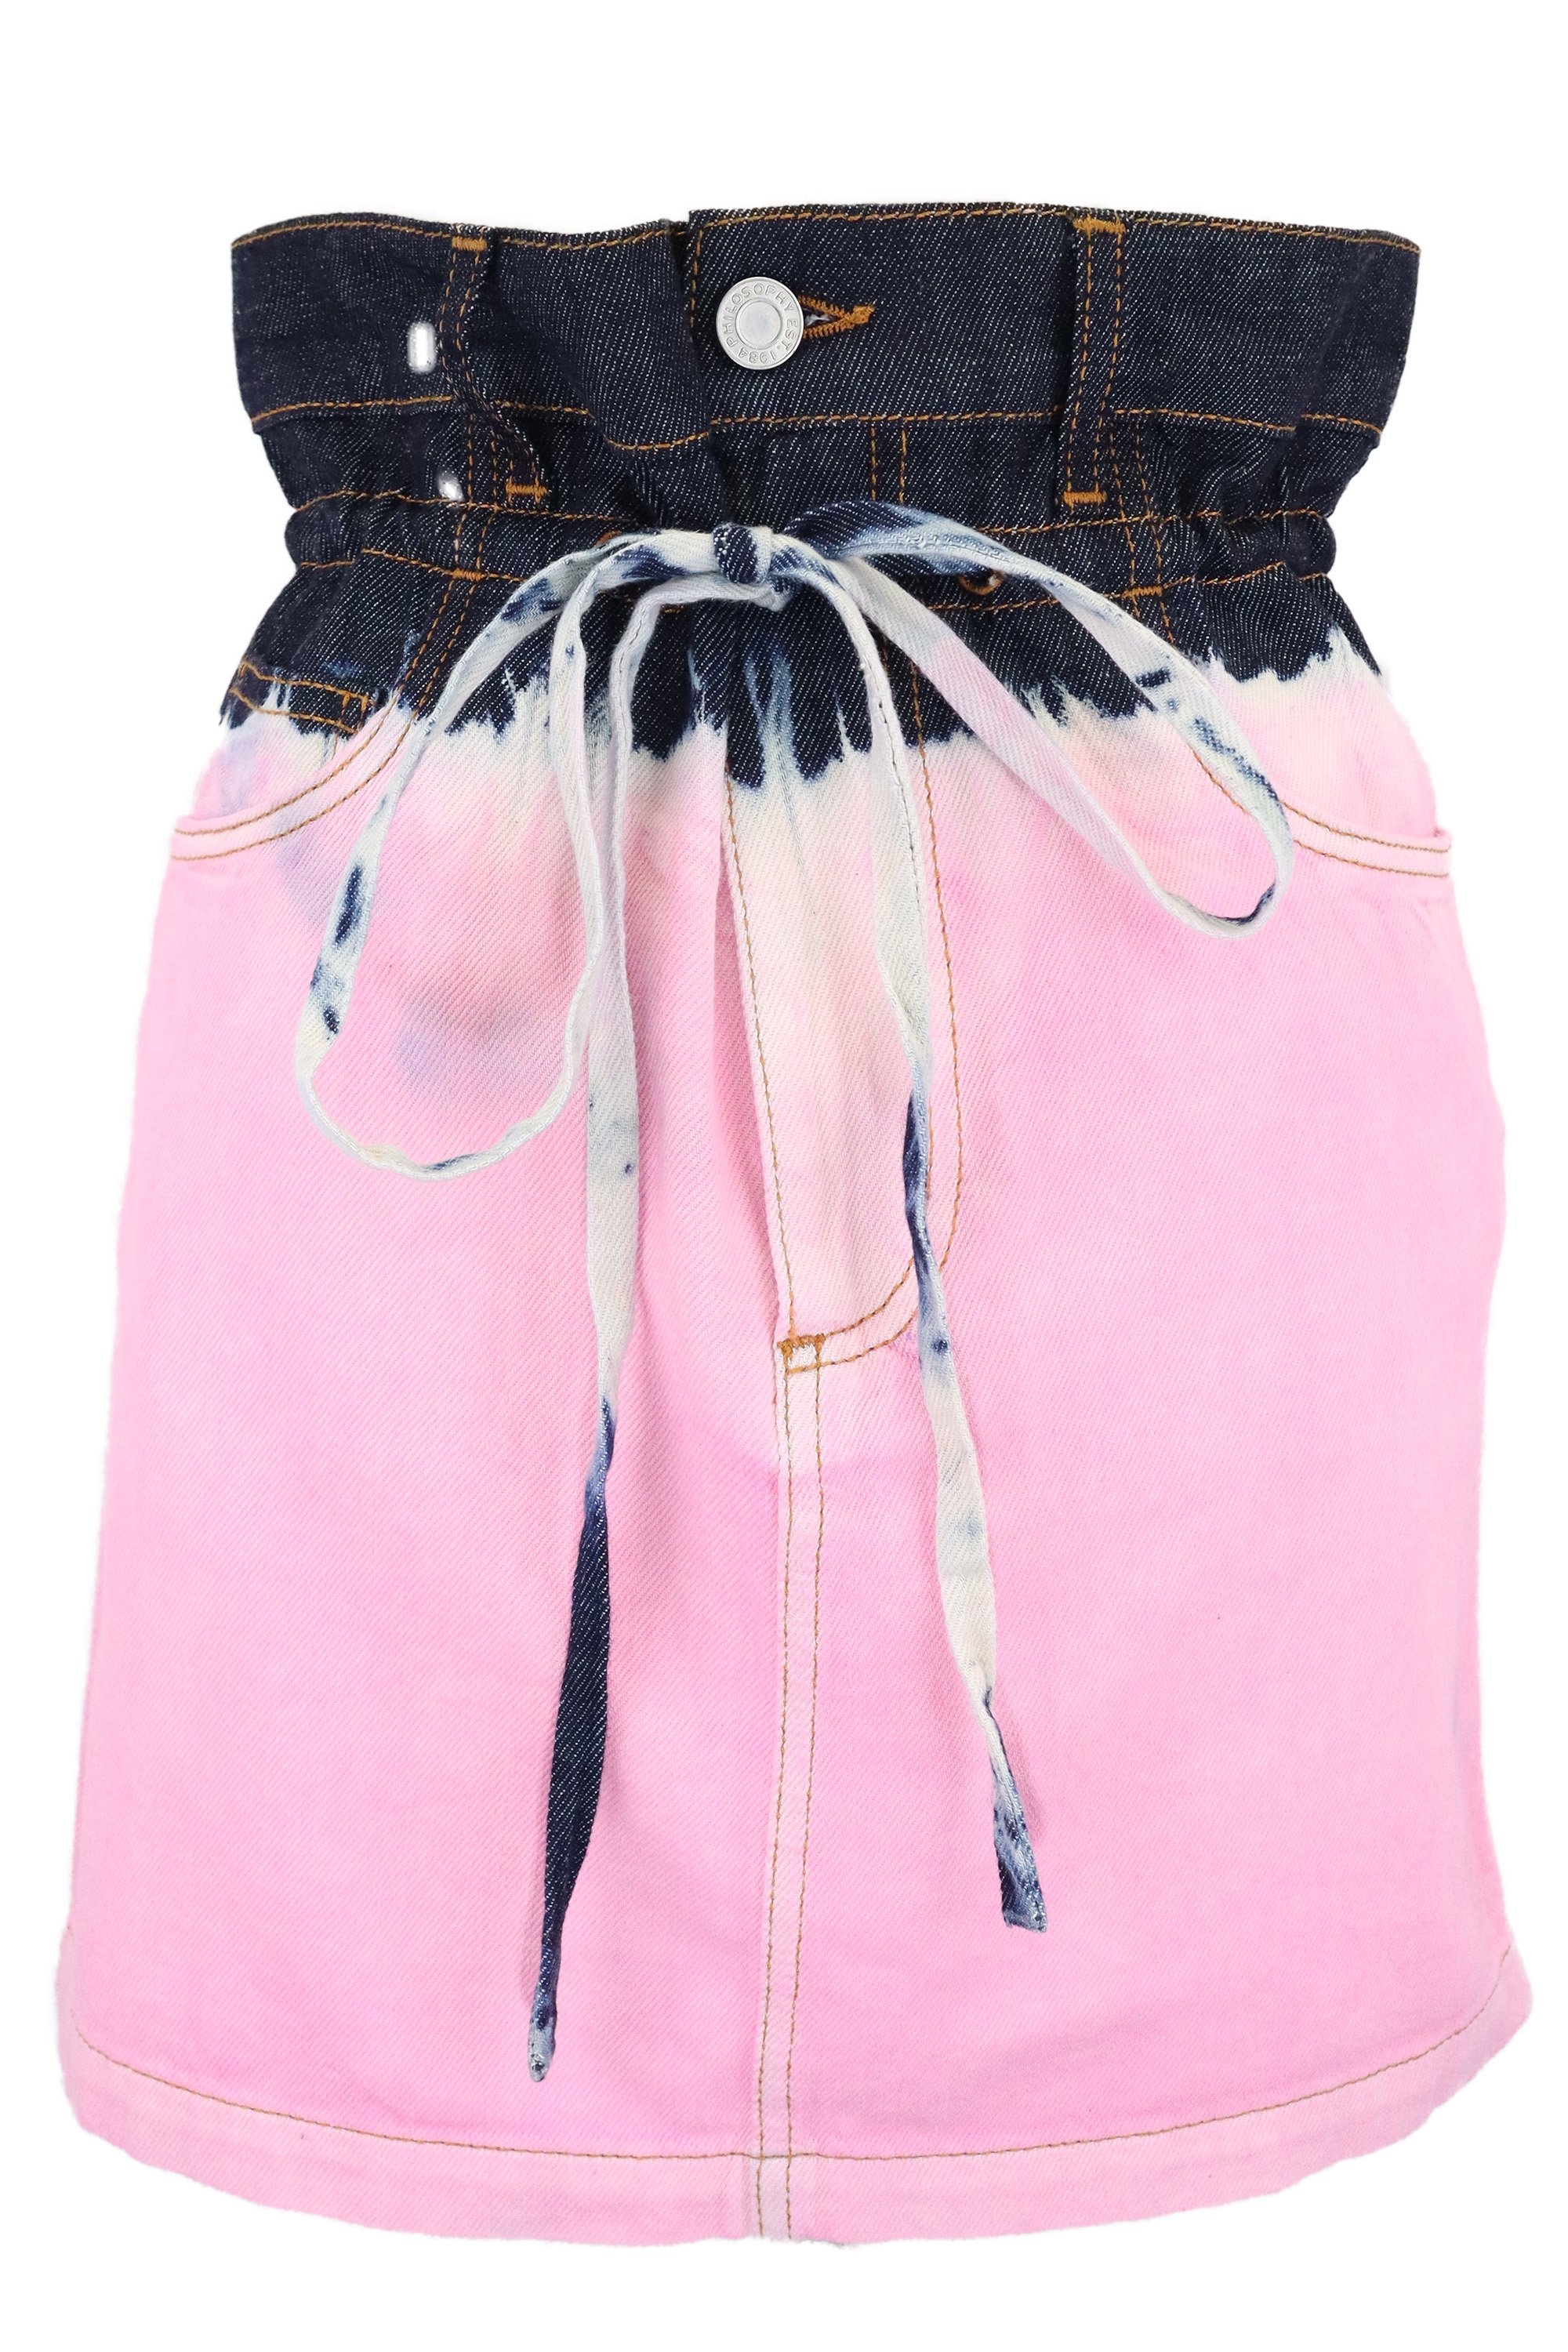 <img class='new_mark_img1' src='https://img.shop-pro.jp/img/new/icons21.gif' style='border:none;display:inline;margin:0px;padding:0px;width:auto;' />30%OFFPHILOSOPHY Denim skirt (PINK)